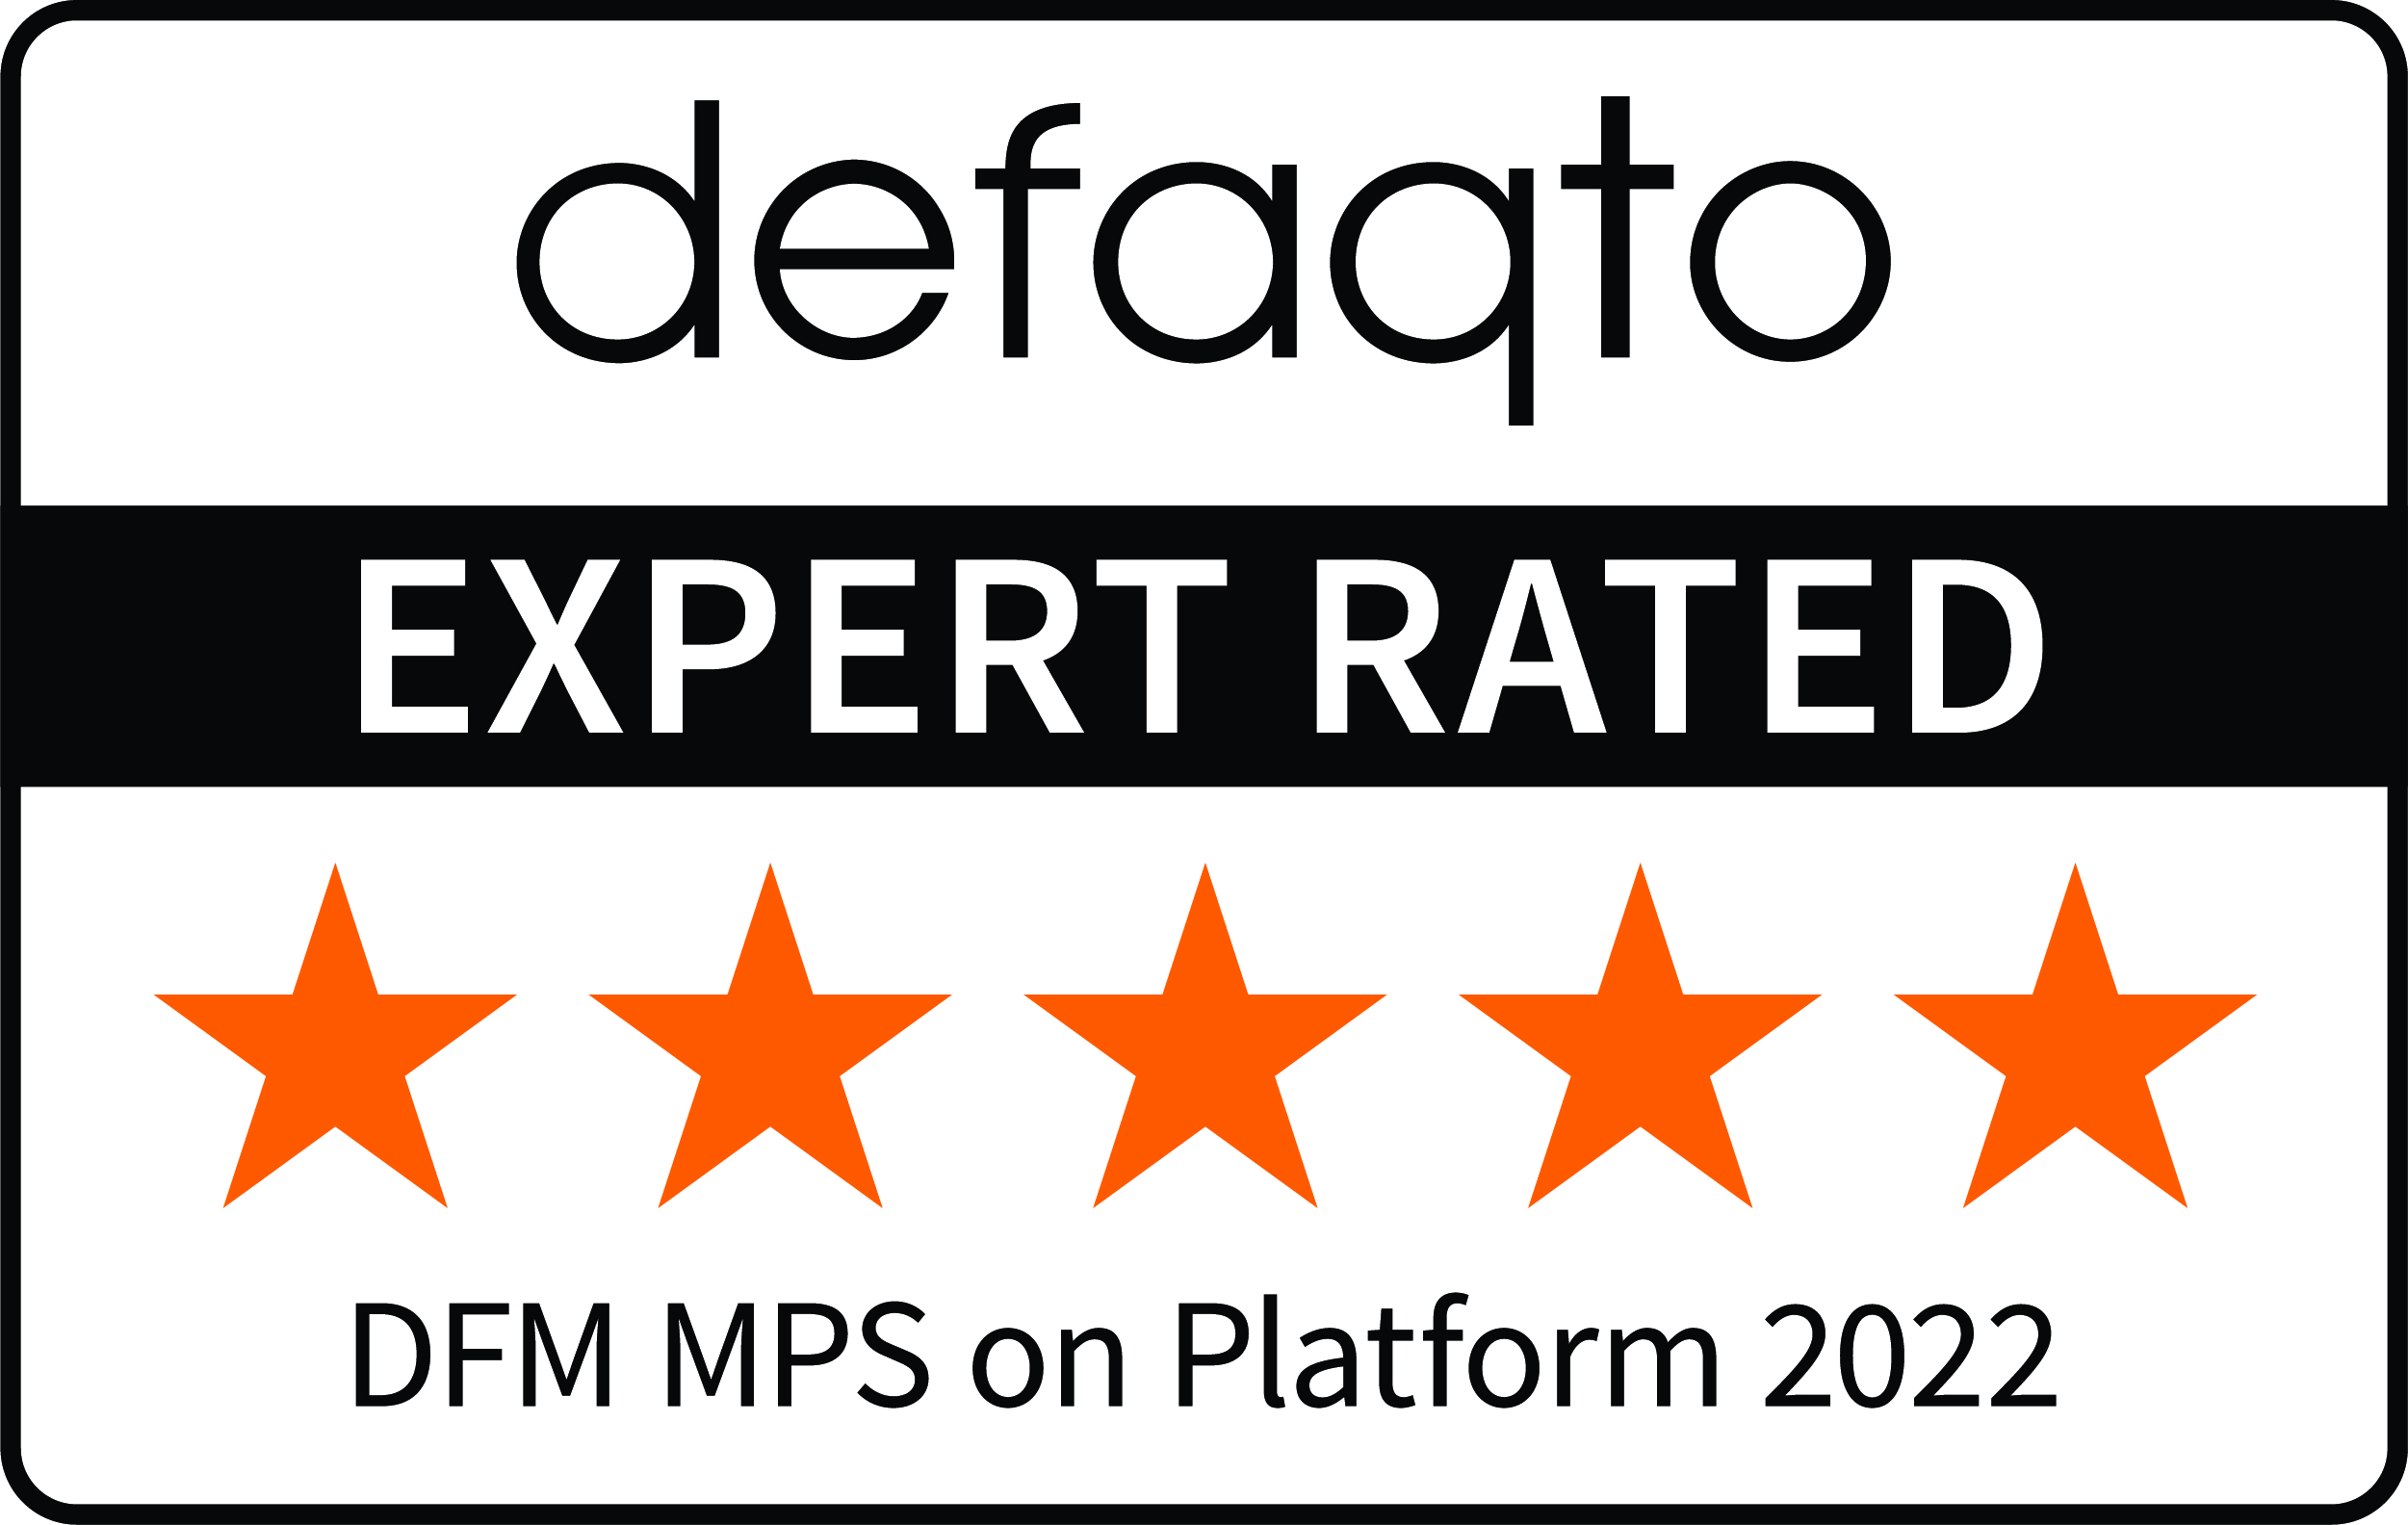 DFM-MPS-on-Platform-Rating-Category-and-Year-5-Colour-CMYK.jpg